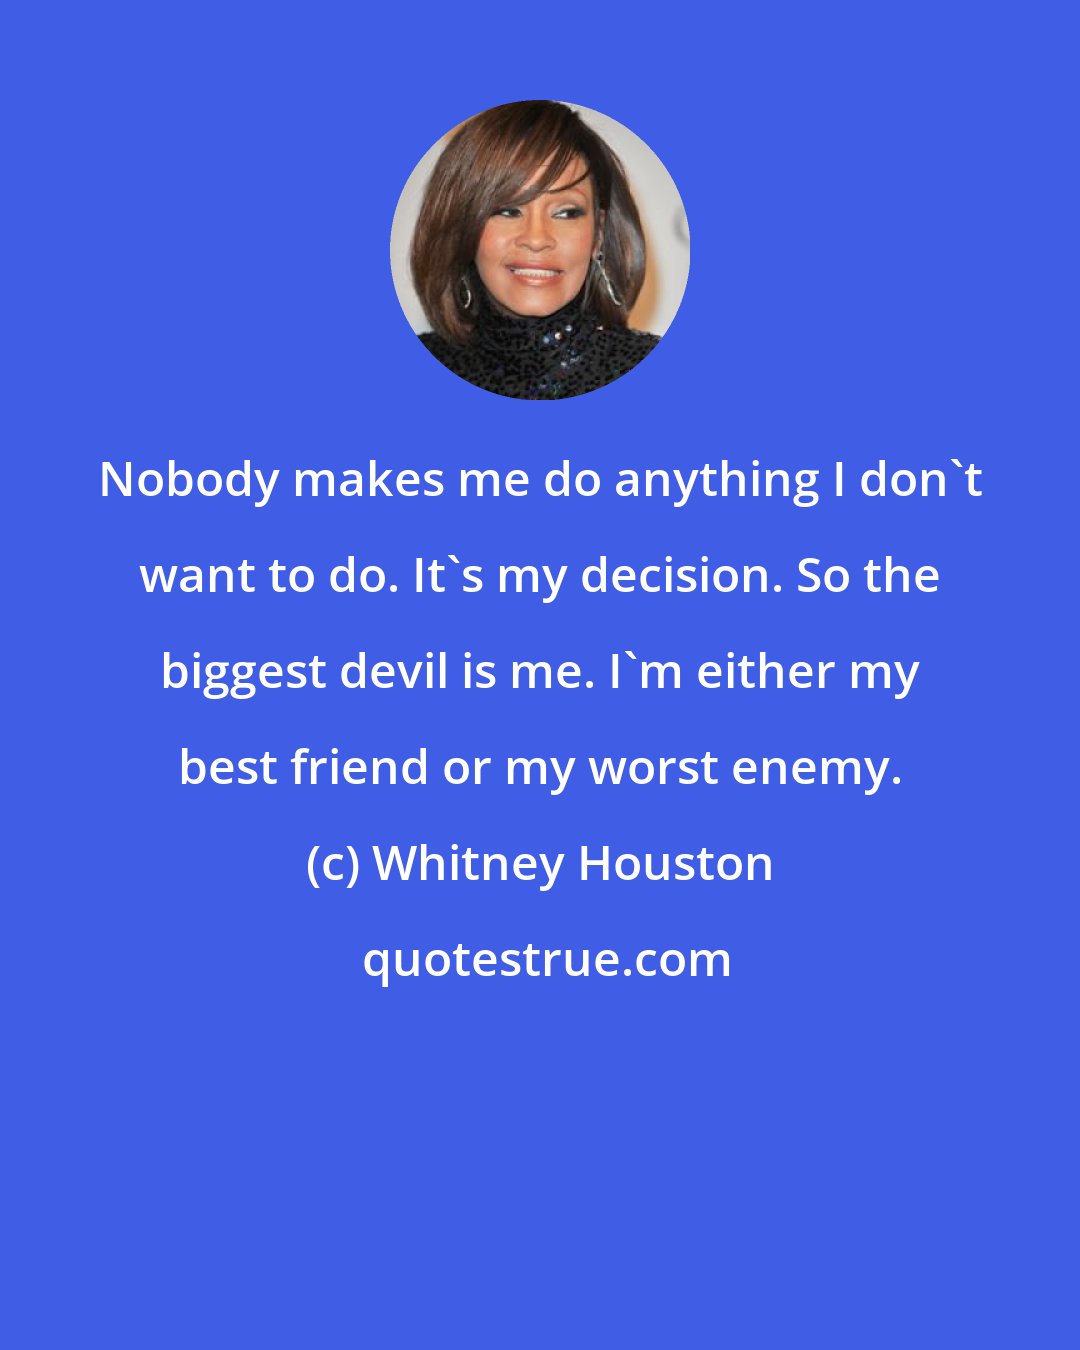 Whitney Houston: Nobody makes me do anything I don't want to do. It's my decision. So the biggest devil is me. I'm either my best friend or my worst enemy.